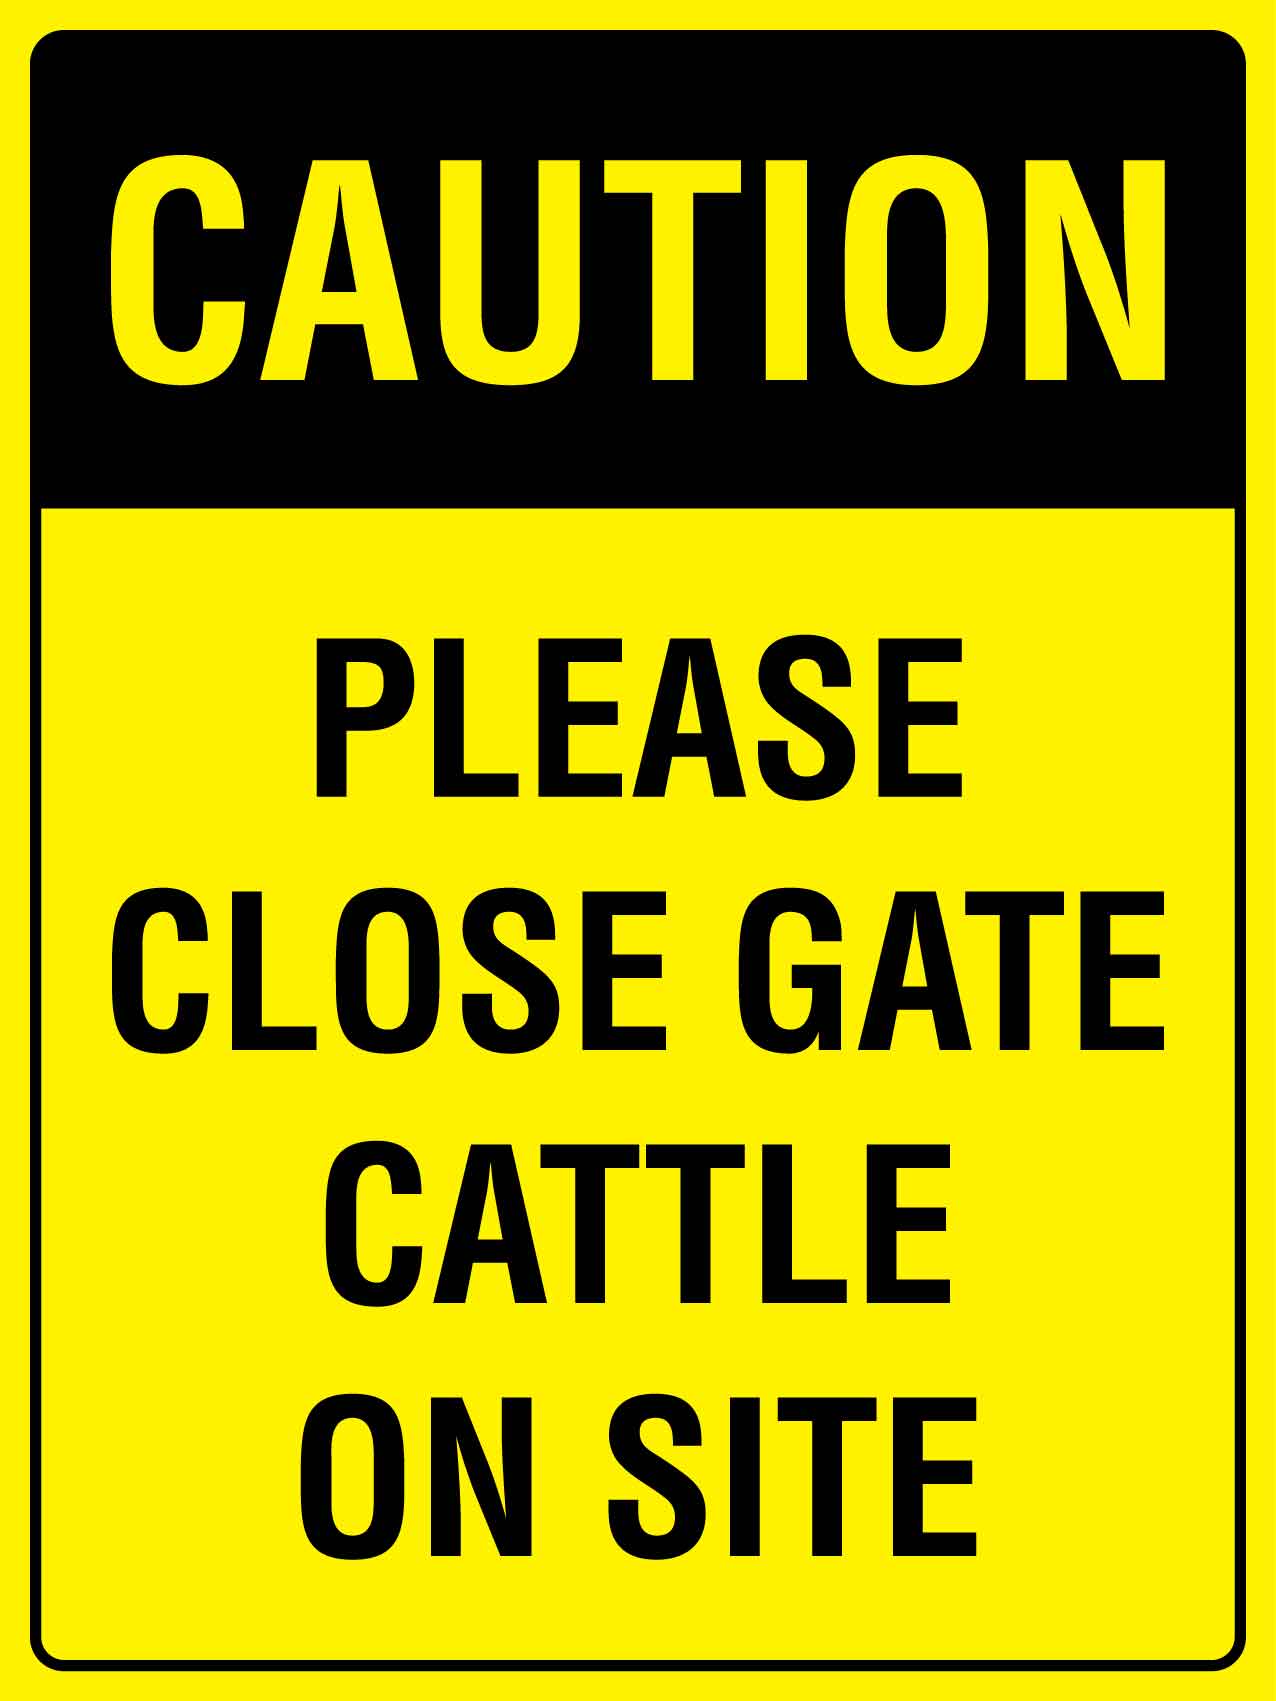 Caution Please Close Gate Cattle On Site Bright Yellow Sign